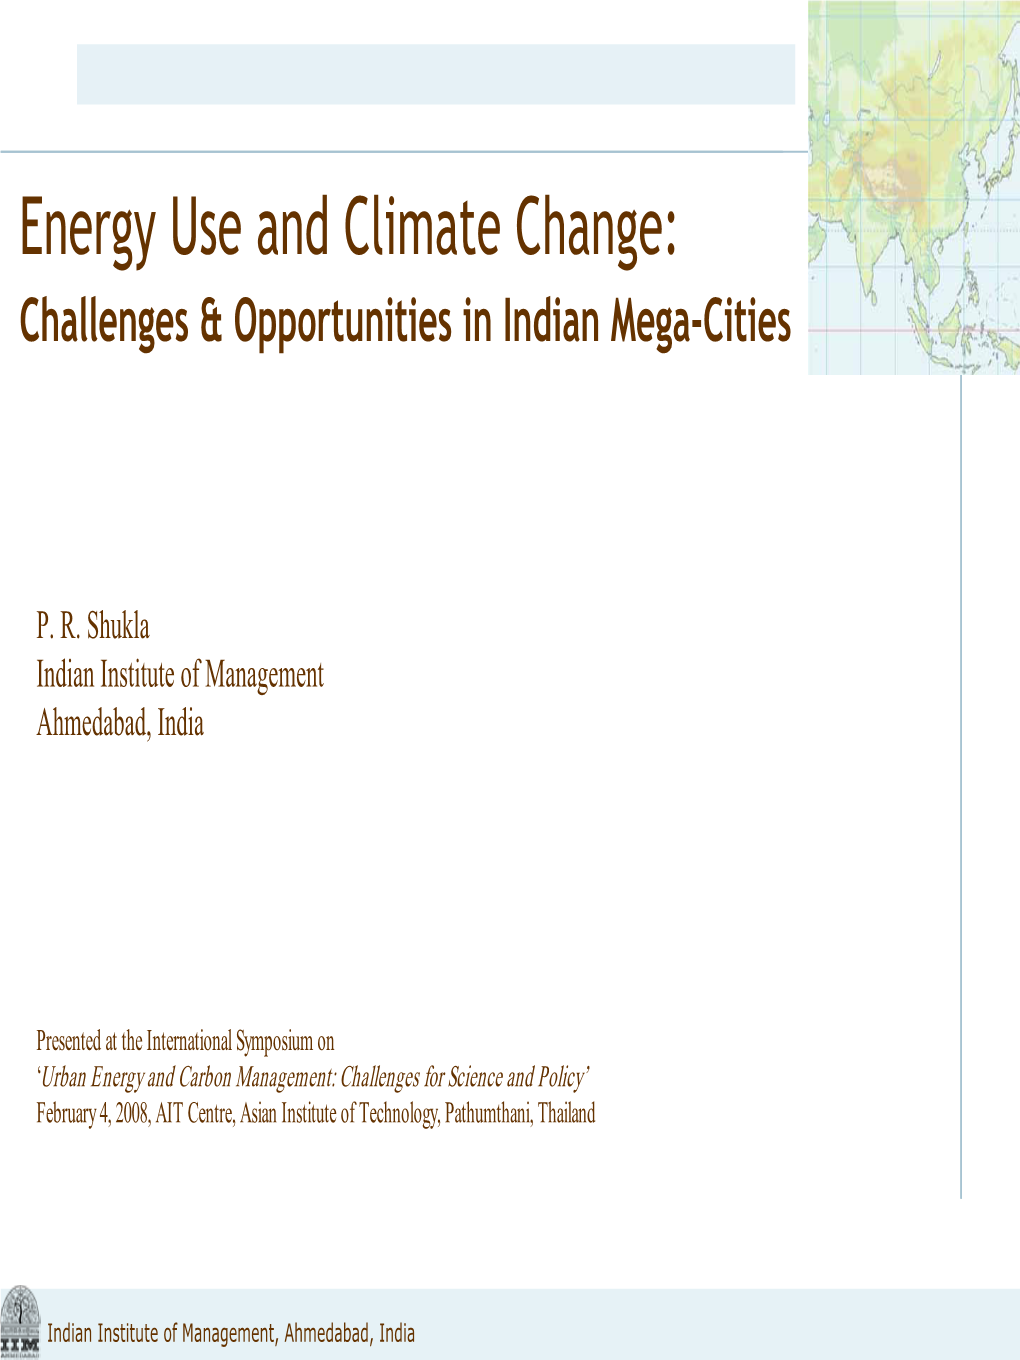 Energy Use and Climate Change: Challenges & Opportunities in Indian Mega-Cities